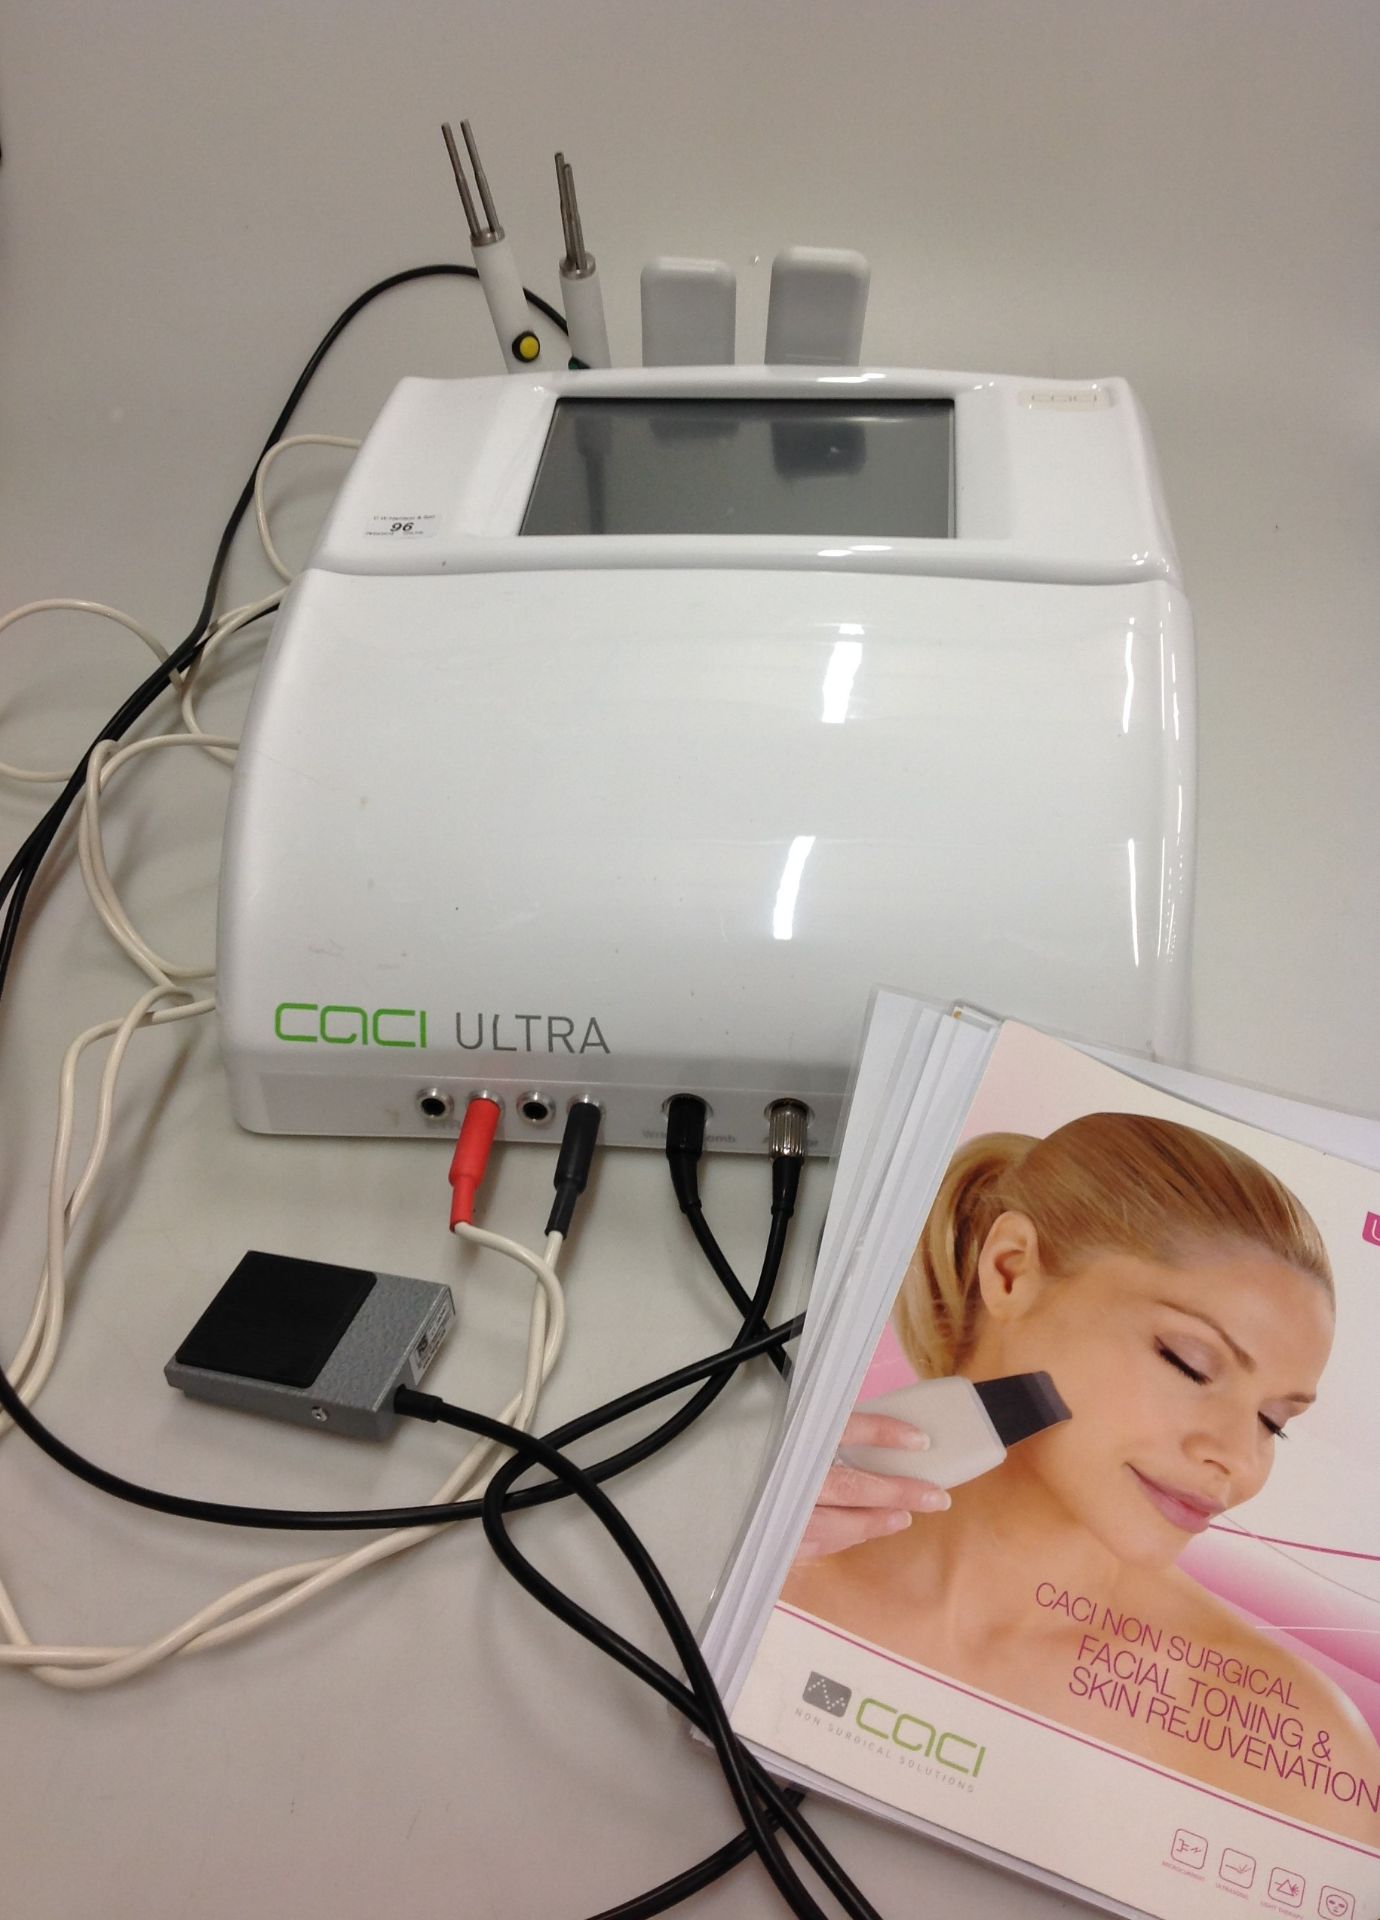 Caci Ultra non-surgical facial toning and skin rejuvenation machine complete with attachments and